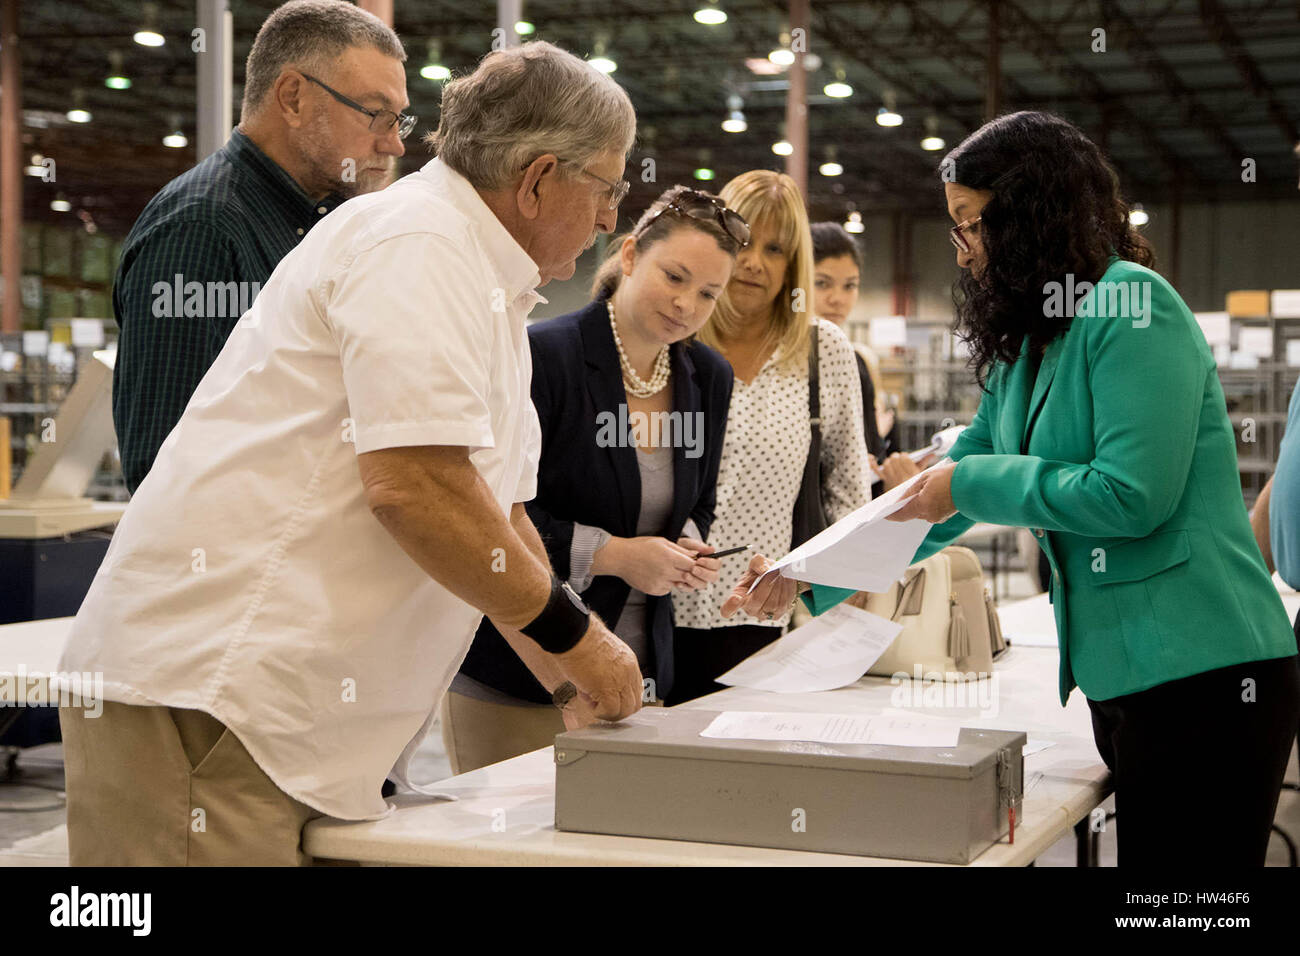 Riviera Beach, Florida, USA. 17th Mar, 2017. Supervisor of Elections Susan Bucher (right) shows results of the recounted Lantana town council race to winner Edward Paul Shropshire (foreground) and Thomas Deringer (left) at the supervisor of elections service center in Riviera Beach, Florida on March 17, 2017. Two votes separated the race between Edward Paul Shropshire and Thomas Deringer with Shropshire confirmed as the winner. Credit: Allen Eyestone/The Palm Beach Post/ZUMA Wire/Alamy Live News Stock Photo